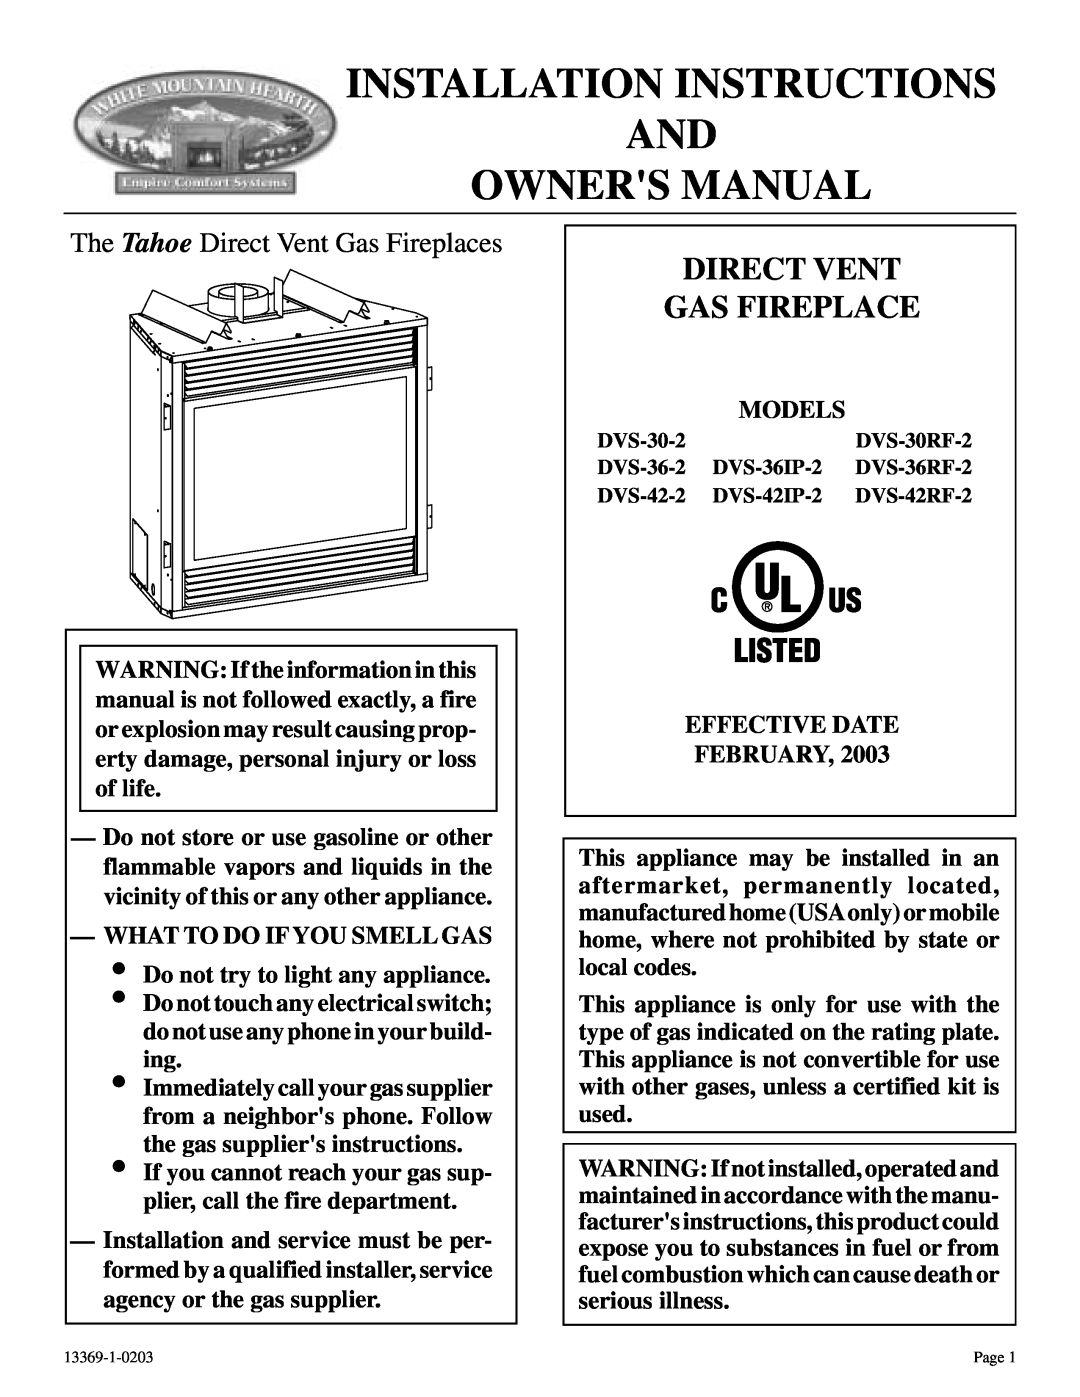 DVS 30-2 installation instructions The Tahoe Direct Vent Gas Fireplaces 